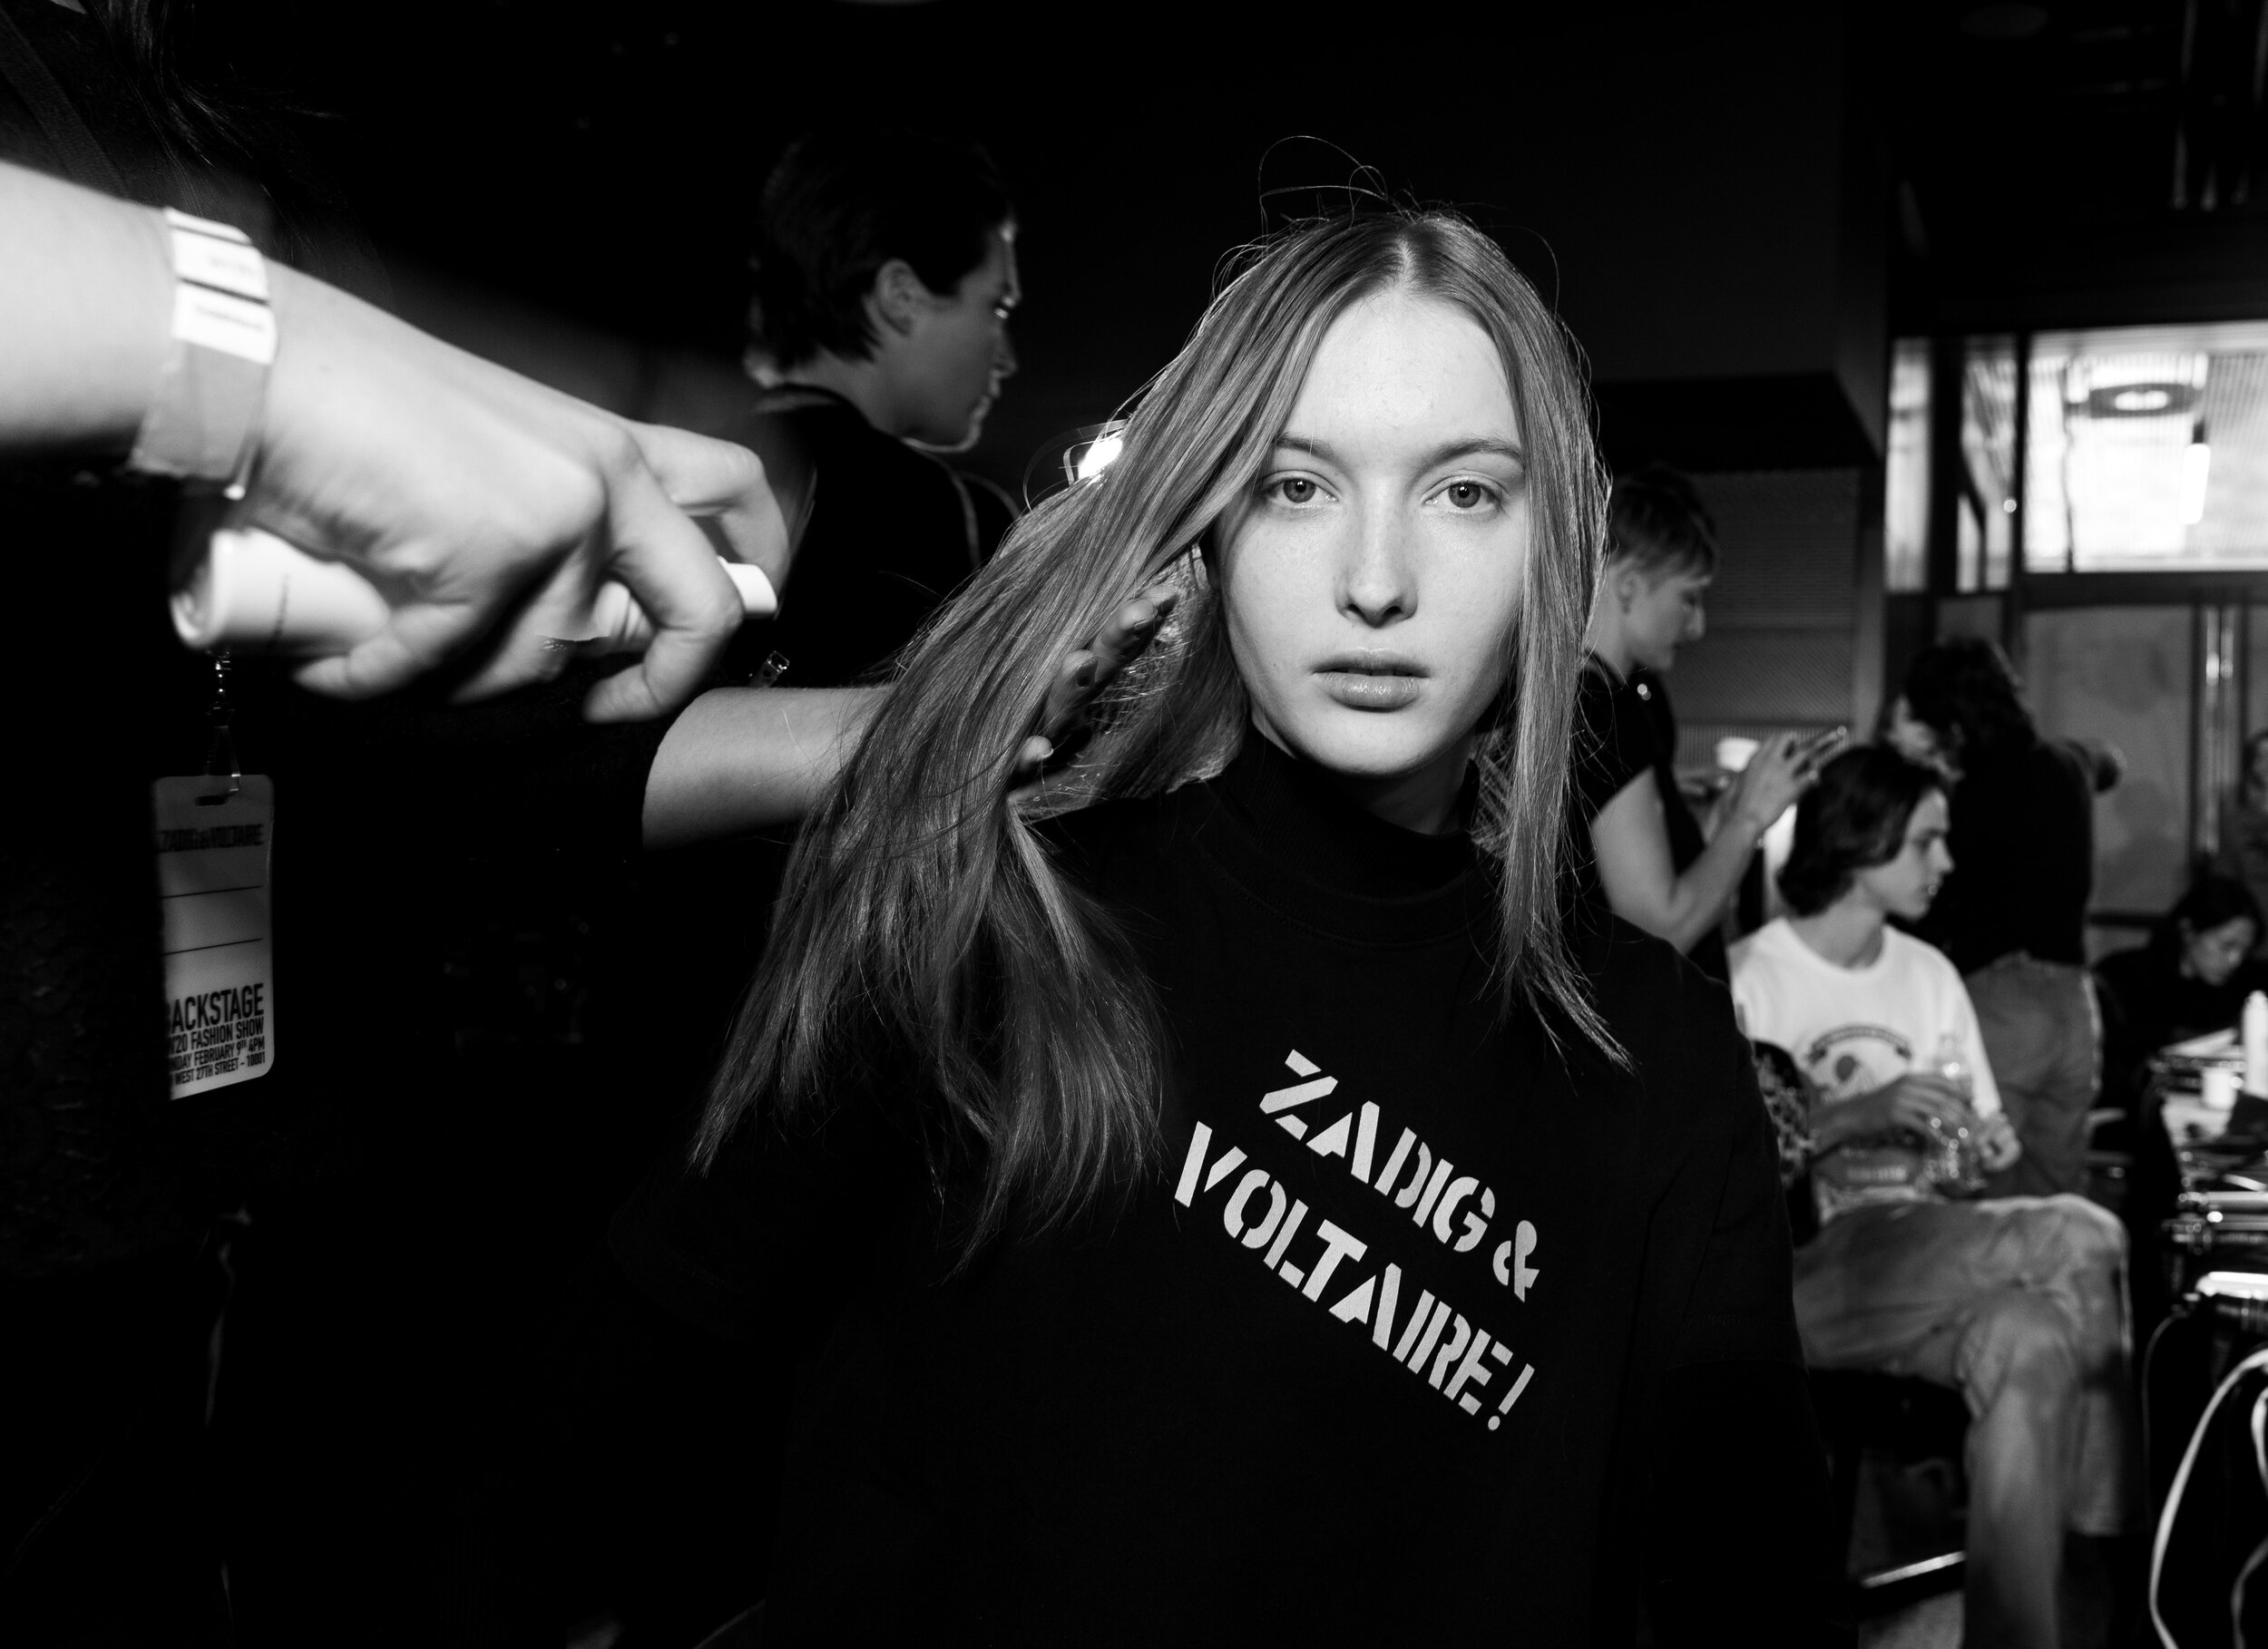 Zadig And Voltaire